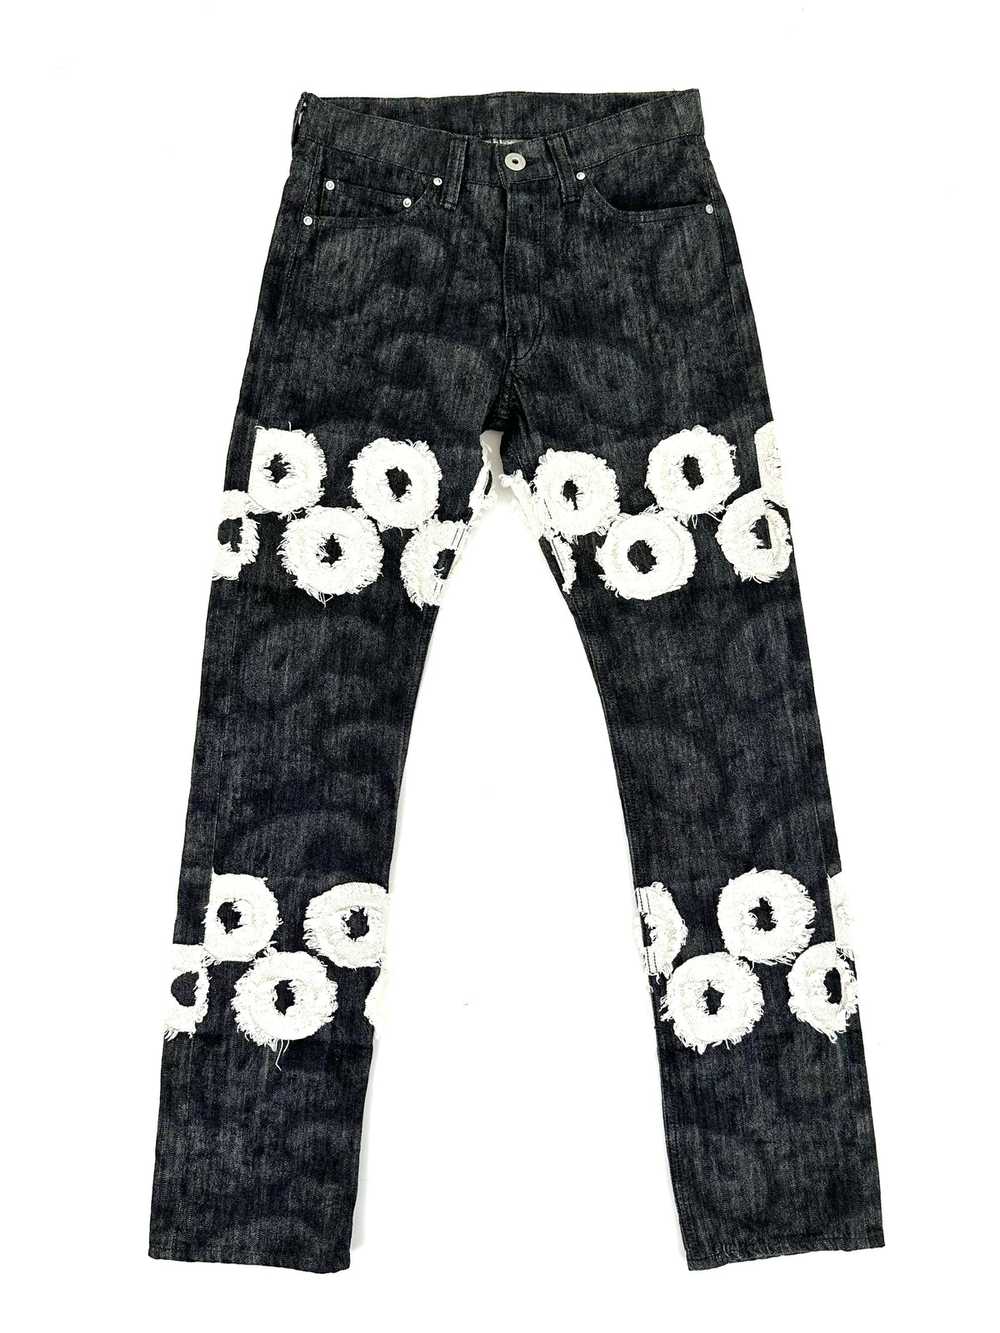 2011 Issey Miyake Archive Embroidered Jeans - image 1